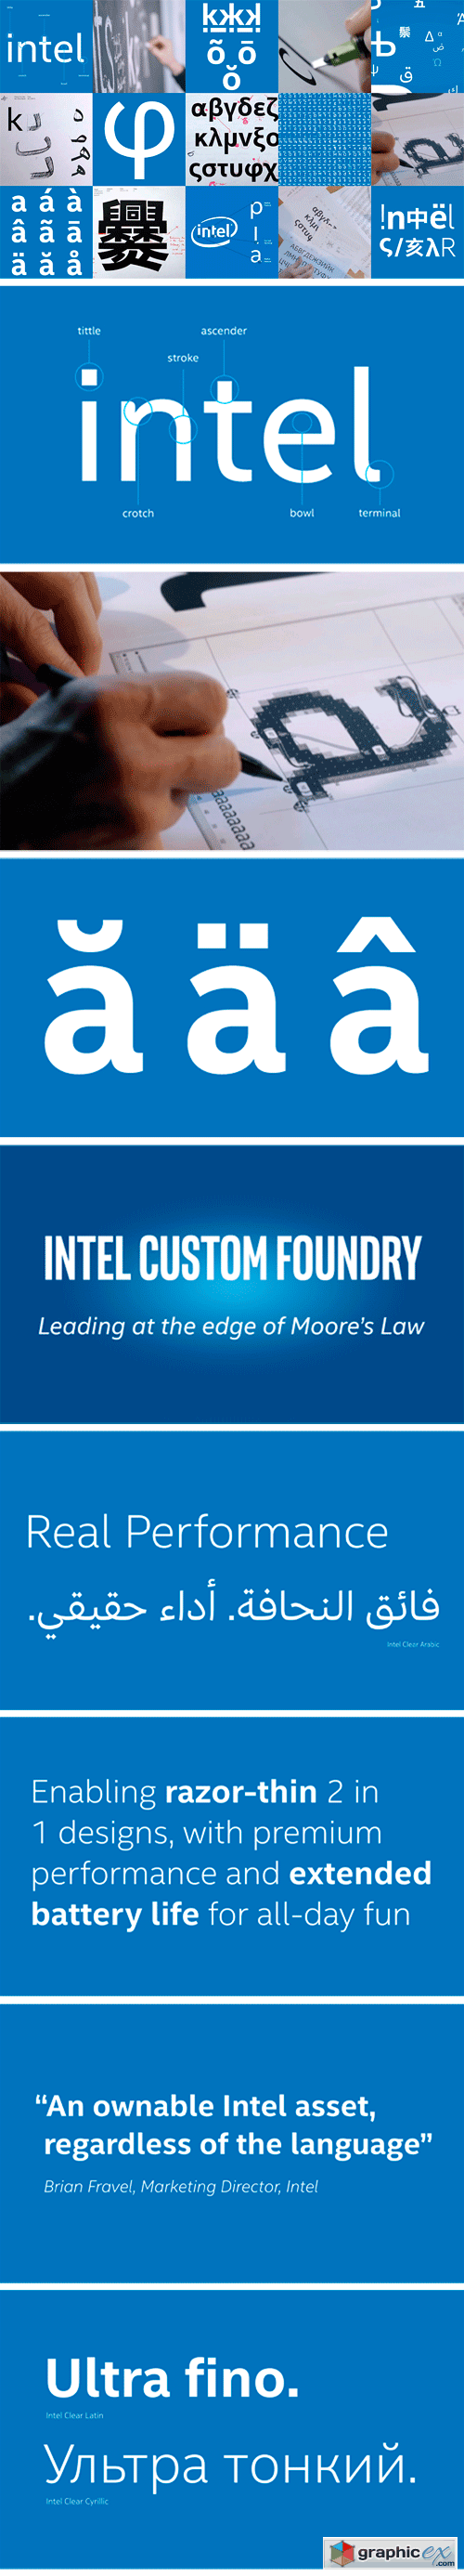 Intel Clear Family - Brand Font for Intel